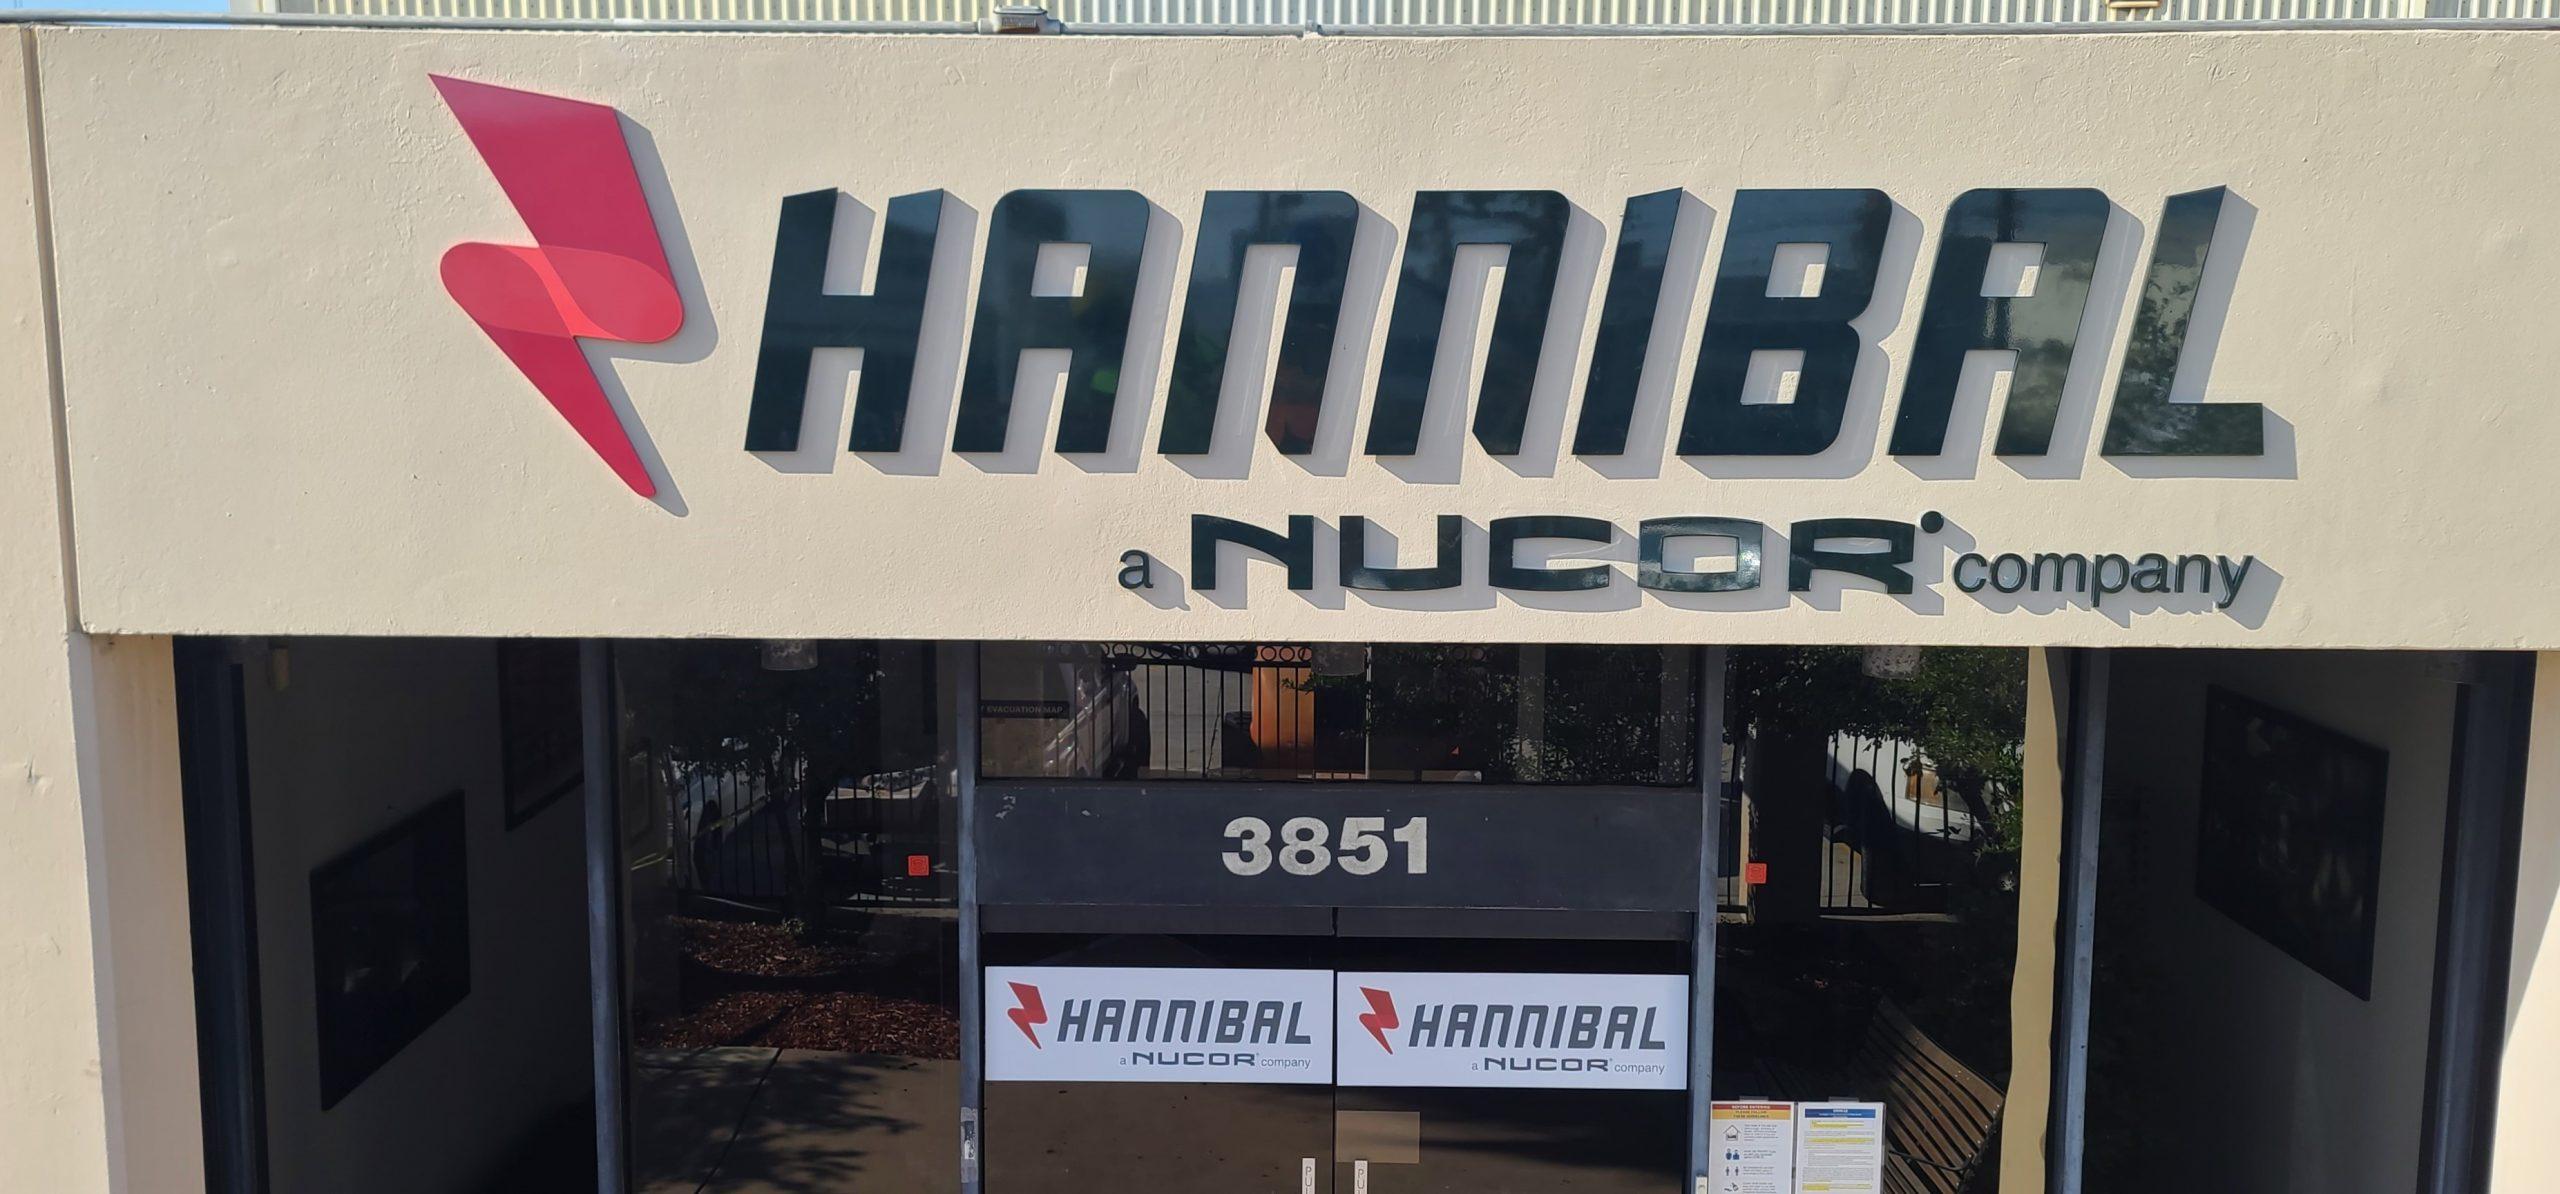 Our sign package for Hannibal Nucor continues with this set of acrylic letters and glass door graphics entrance signs for their Vernon office.